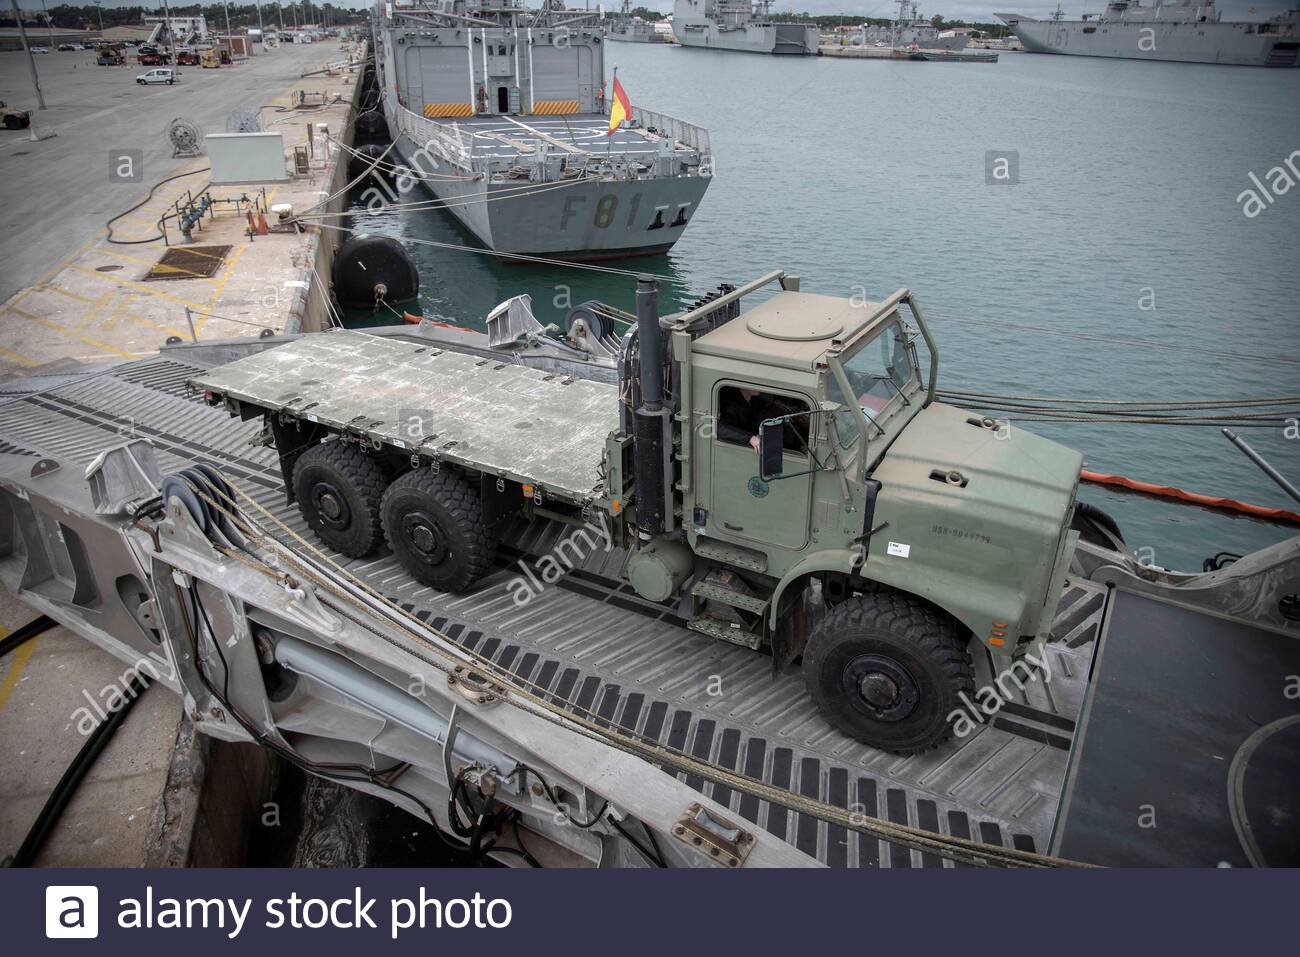 191214-n-pe825-0007-rota-spain-dec-14-2019-a-seabee-assigned-to-naval-mobile-construction-battalion-nmcb-11-drives-a-medium-tactical-vehicle-replacement-truck-aboard-the-spearhead-class-expeditionary-fast-transport-ship-usns-yuma-t-epf-8-during-the-battalions-mount-out-exercise-mox-an-mox-simulates-the-battalions-ability-to-deploy-their-89-person-air-detachment-within-48-hours-to-support-missions-required-by-a-supported-commander-nmcb-11-is-currently-forward-deployed-to-rota-spain-in-support-of-commander-task-force-ctf-68-to-provide-expeditionary-construction-and-engin-2AFXWEN.jpg